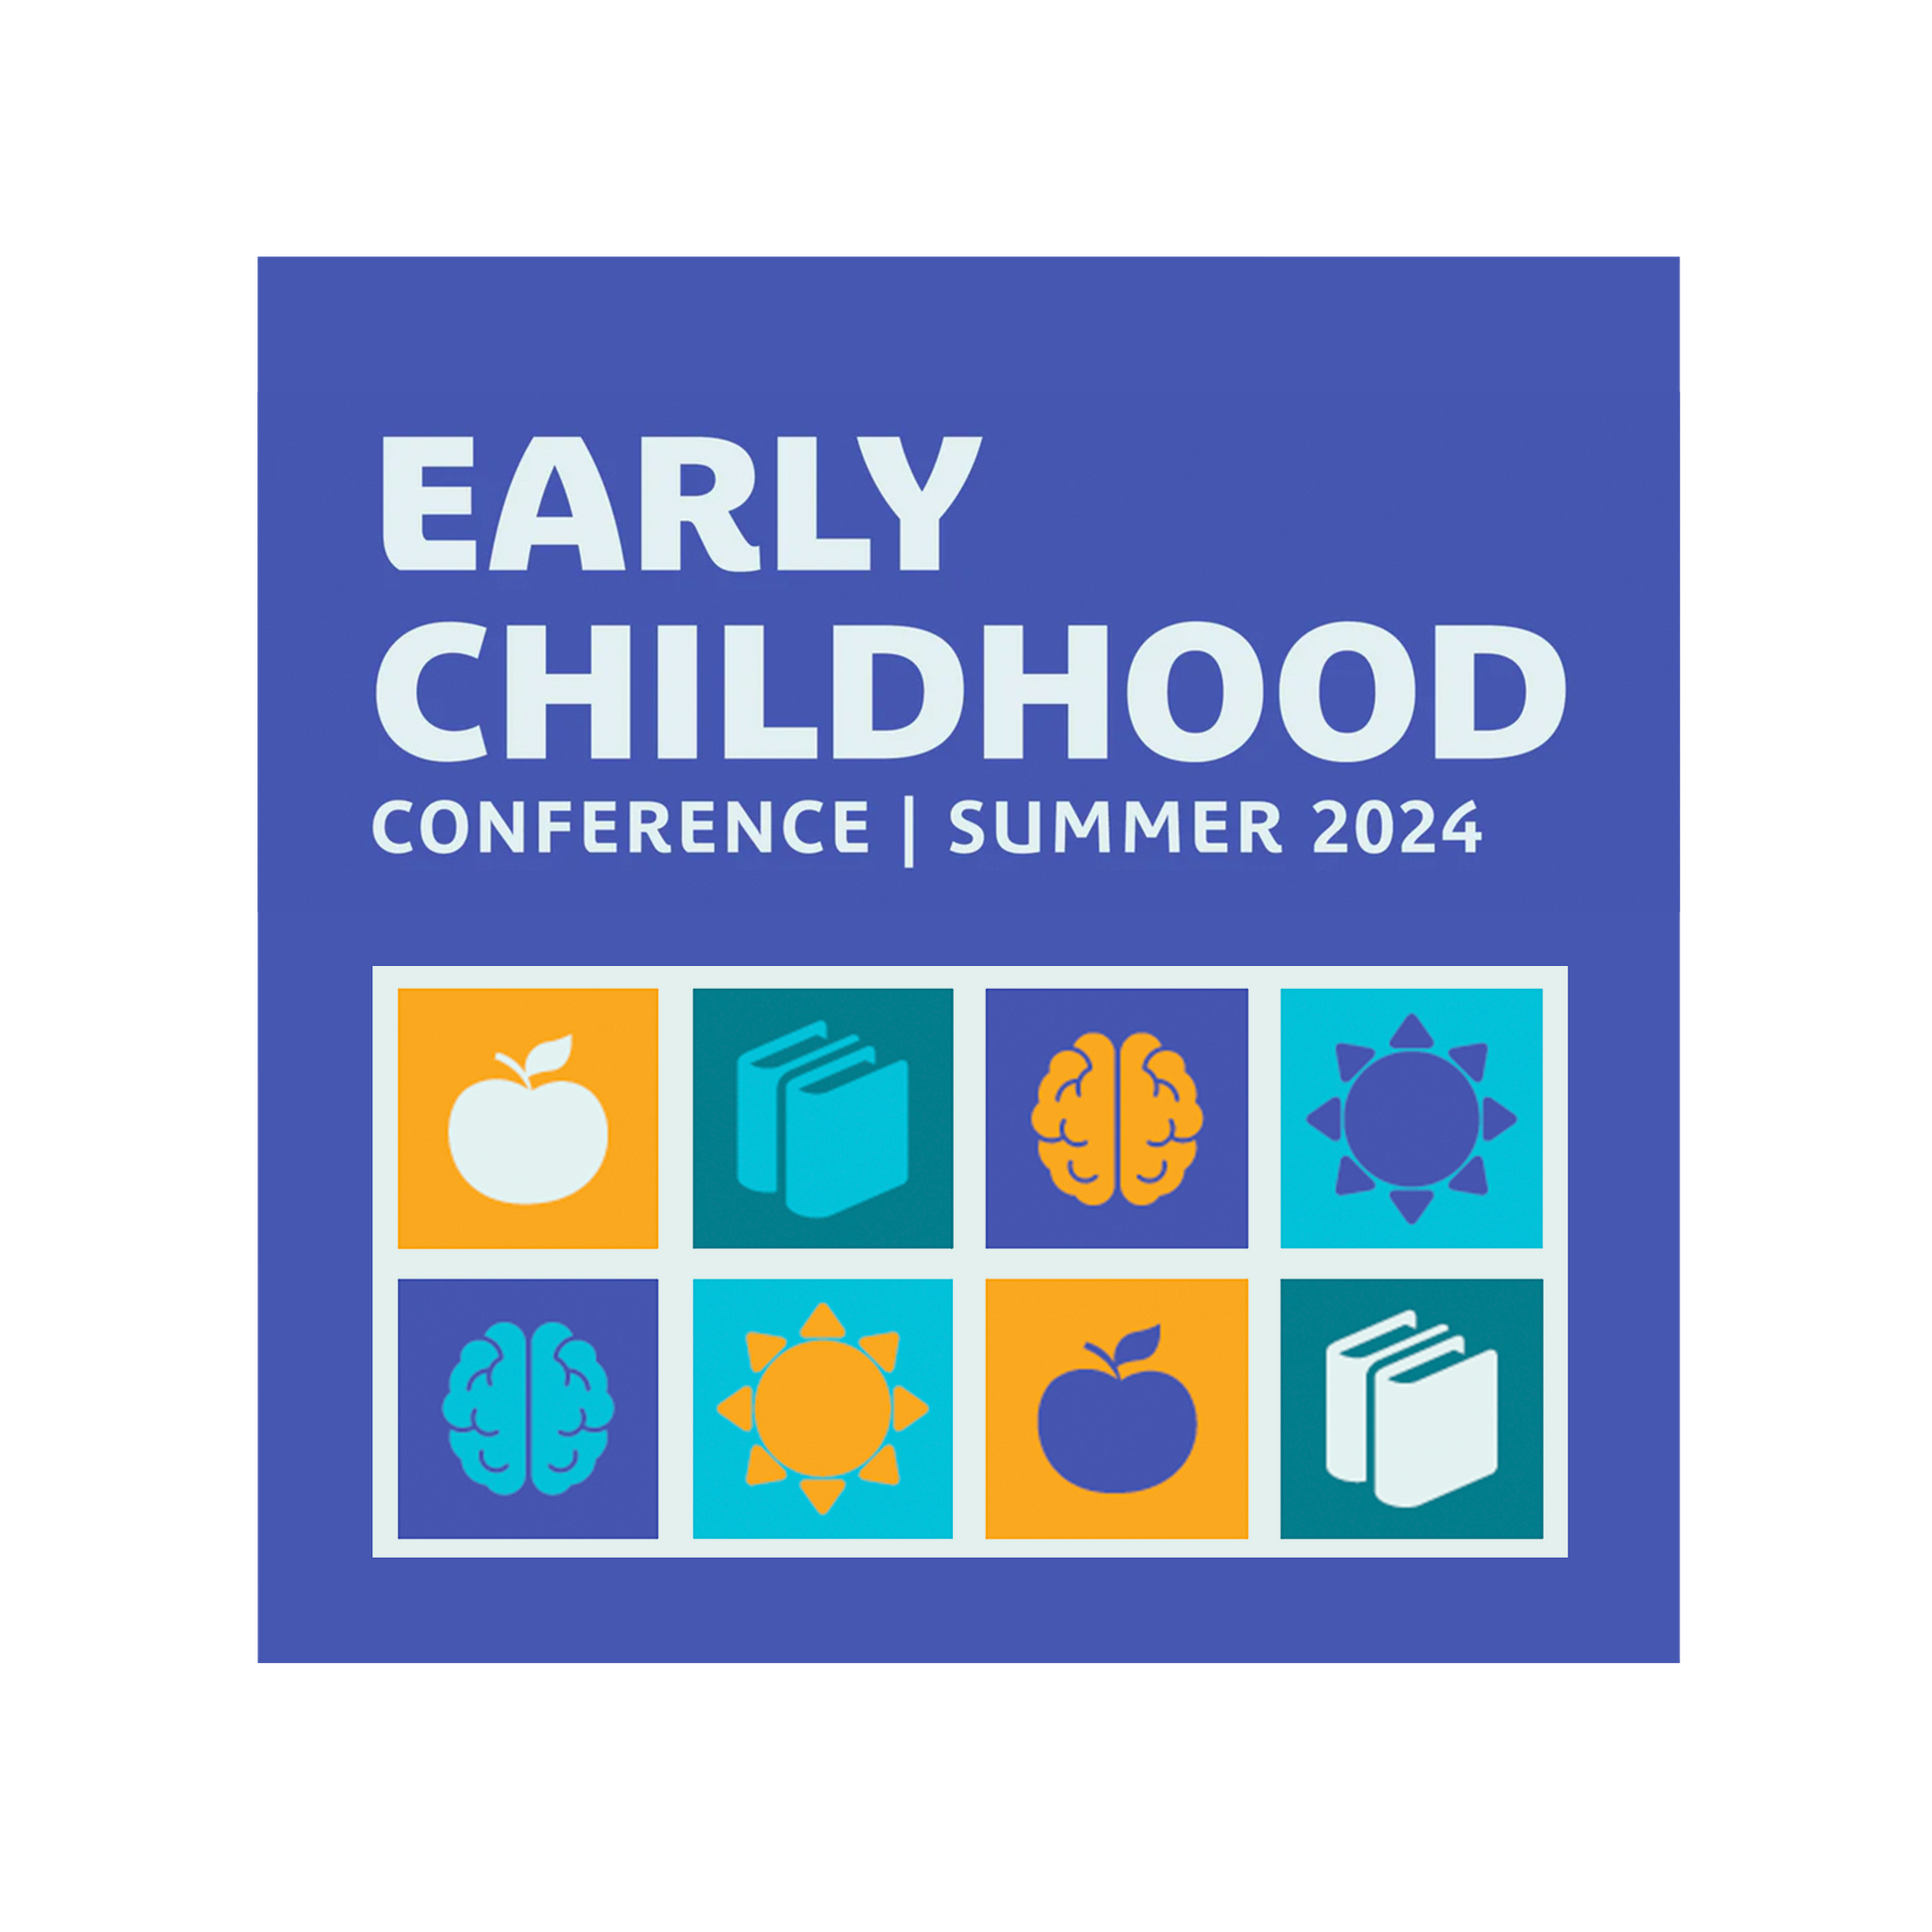 Blue background with the Early Childhood Conference logo with icons of apples, books, brains, and the sun.